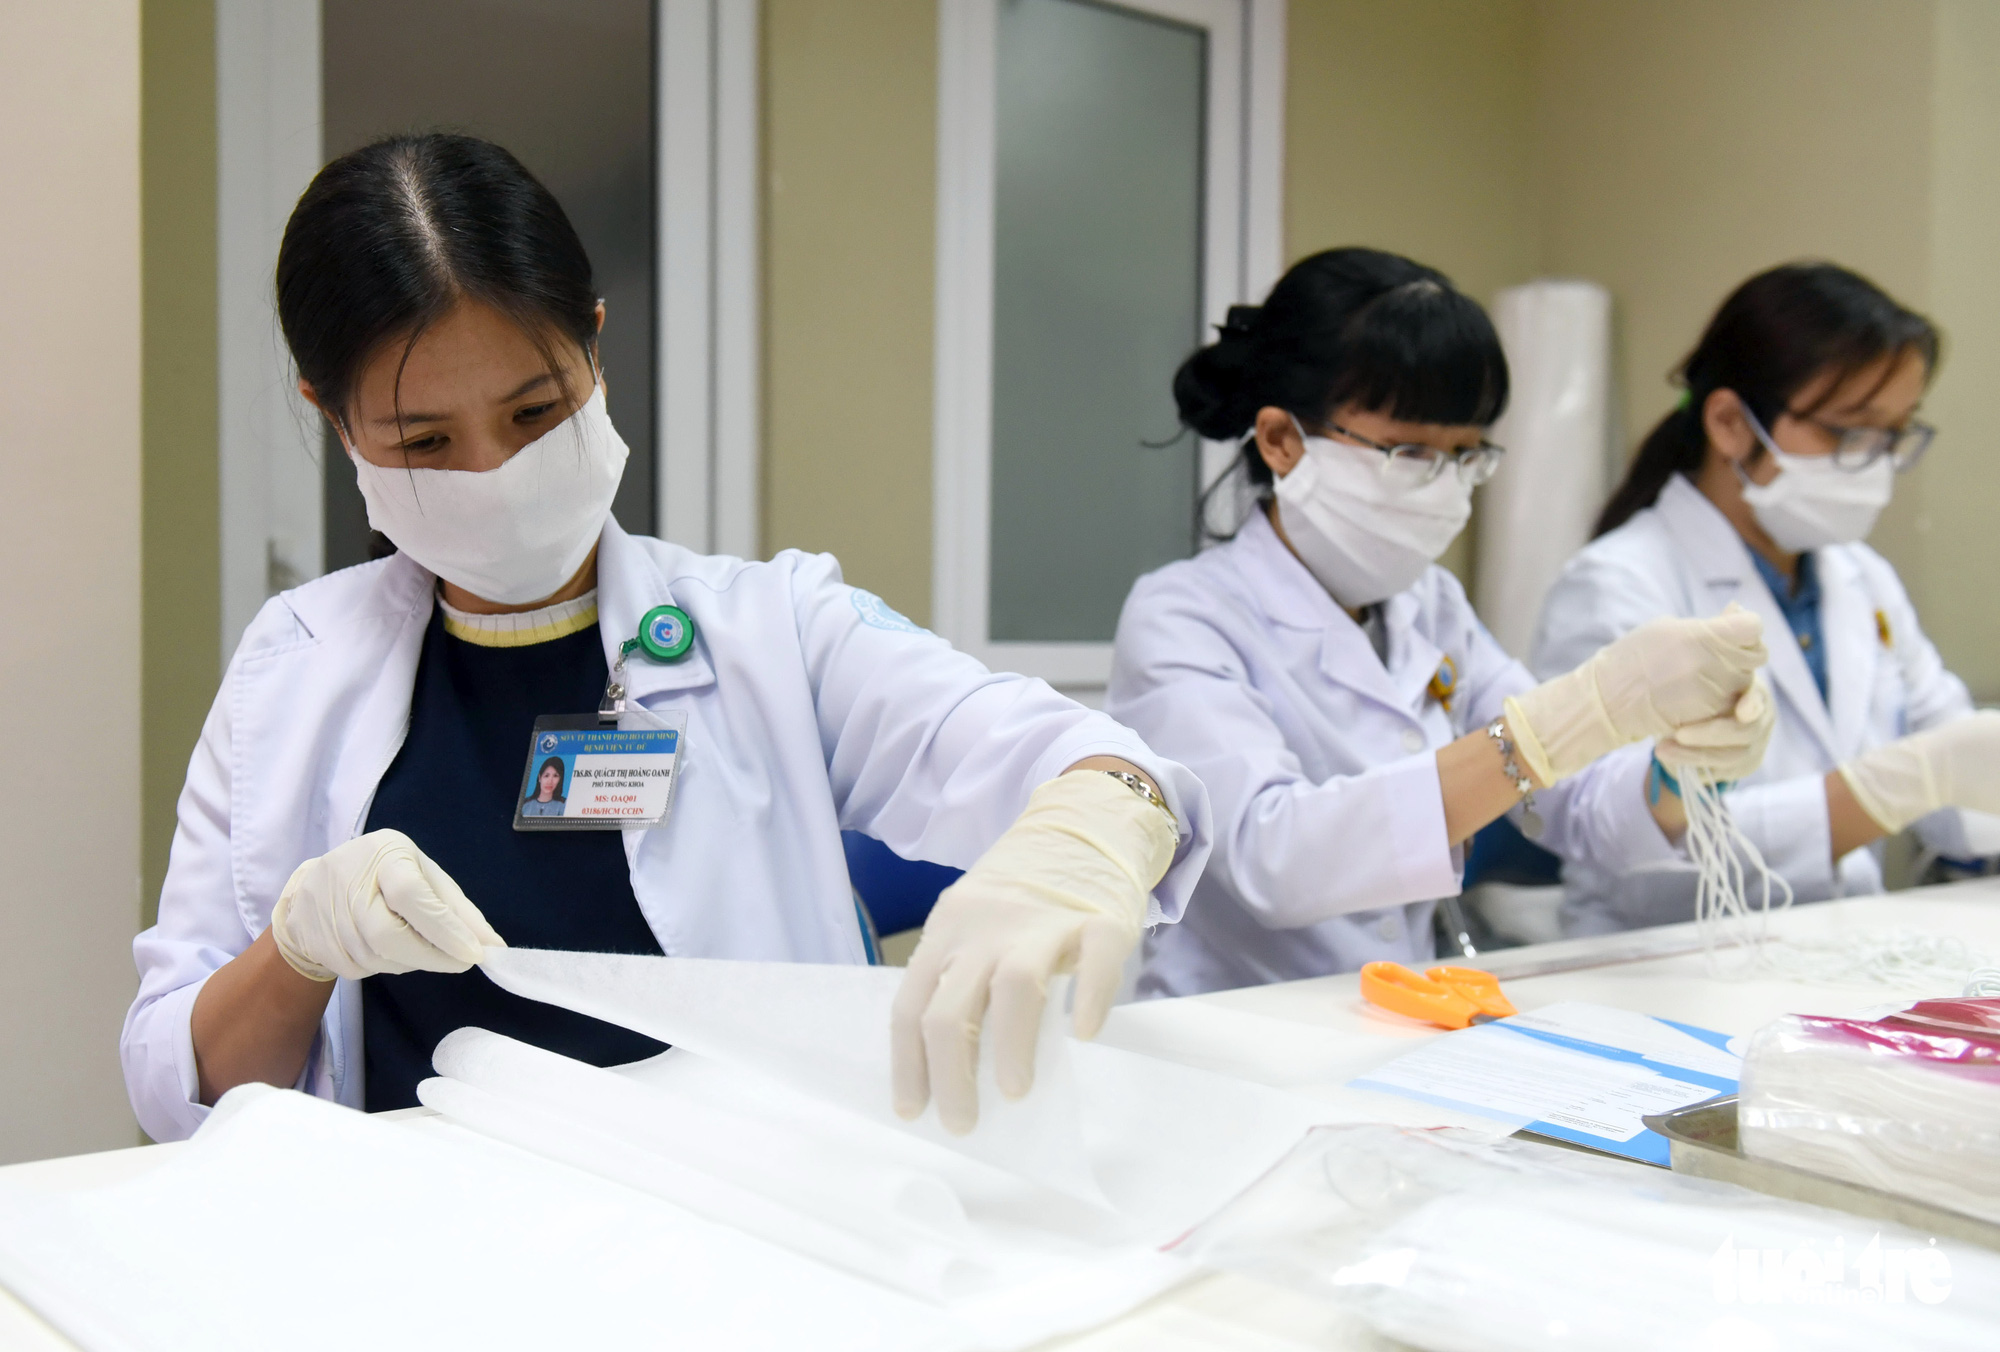 Quach Thi Hoang Anh (L), a doctor at Tu Du Maternity Hospital in Ho Chi Minh City, assists her colleagues in making face masks after her shift, February 13, 2020. Photo: Duyen Phan / Tuoi Tre